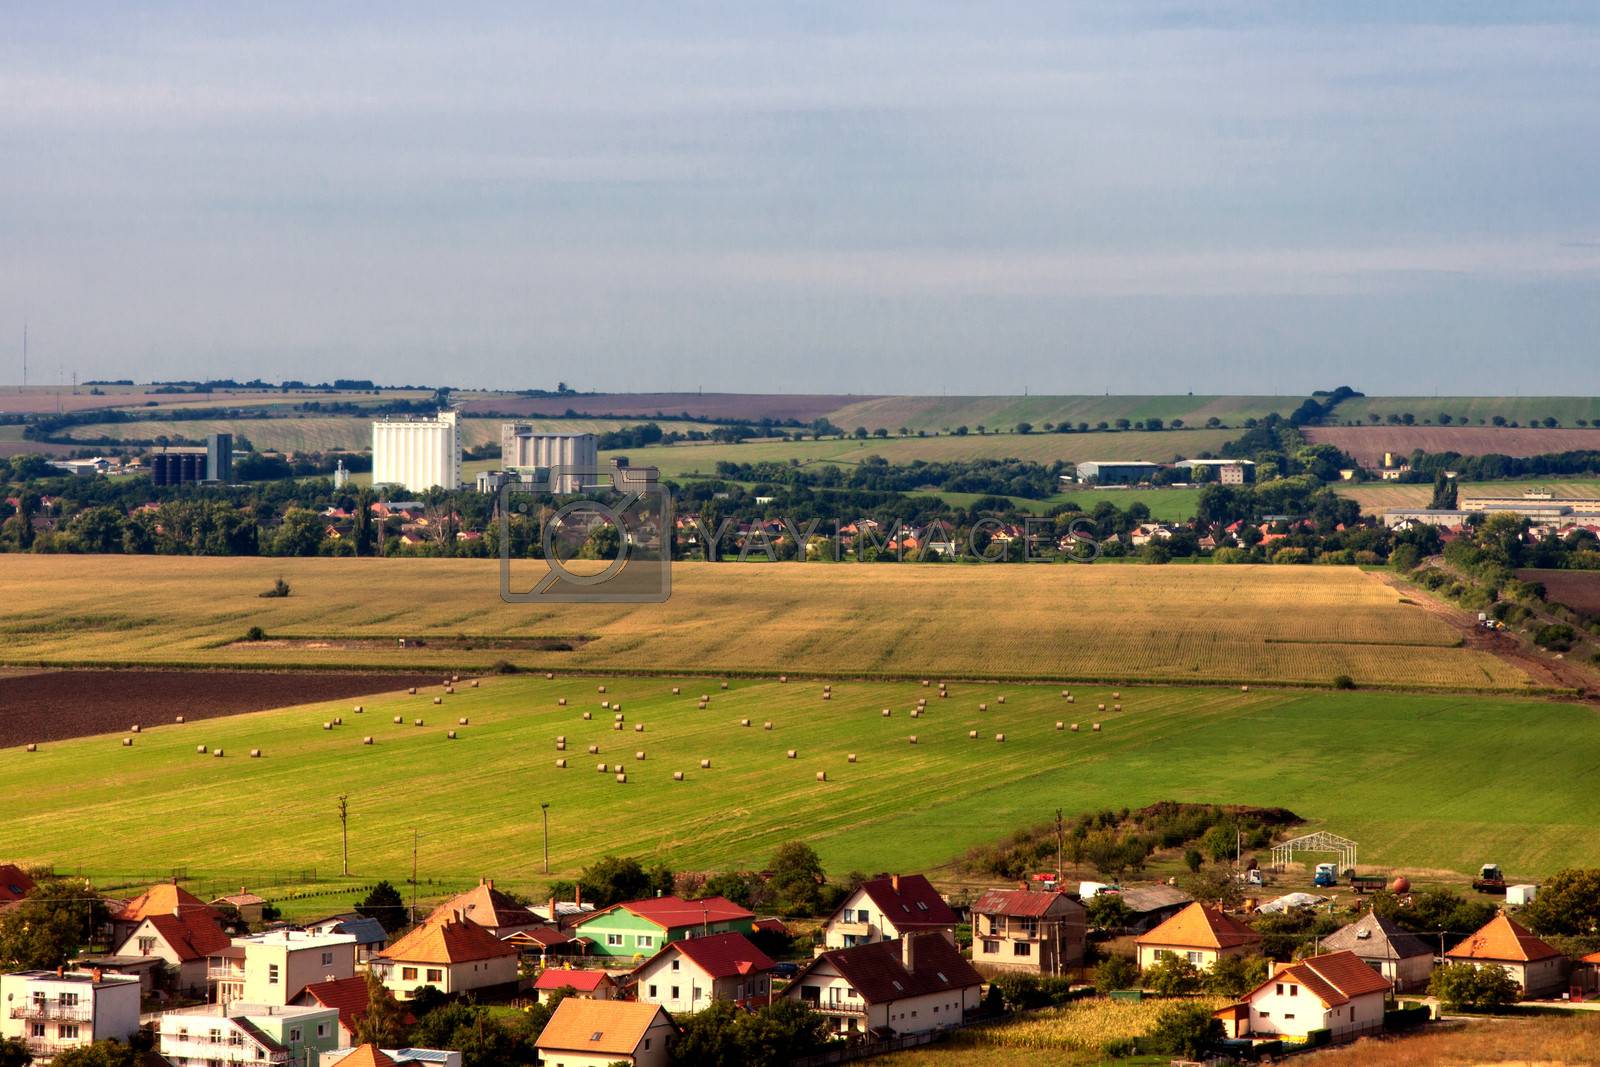 In the countryside landscape with houses and fields in autumn